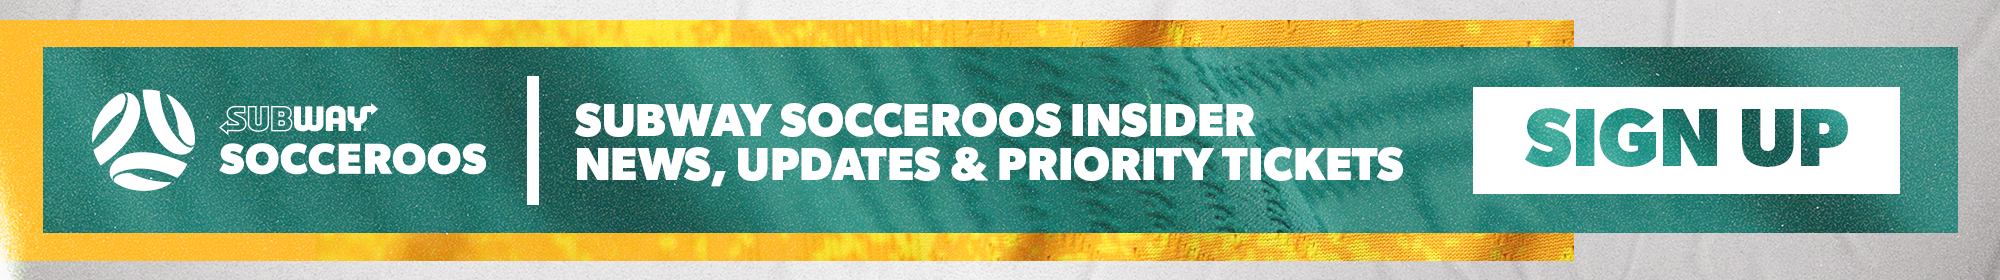 Sign up for exclusive Subway Socceroos news, updates and priority ticketing access